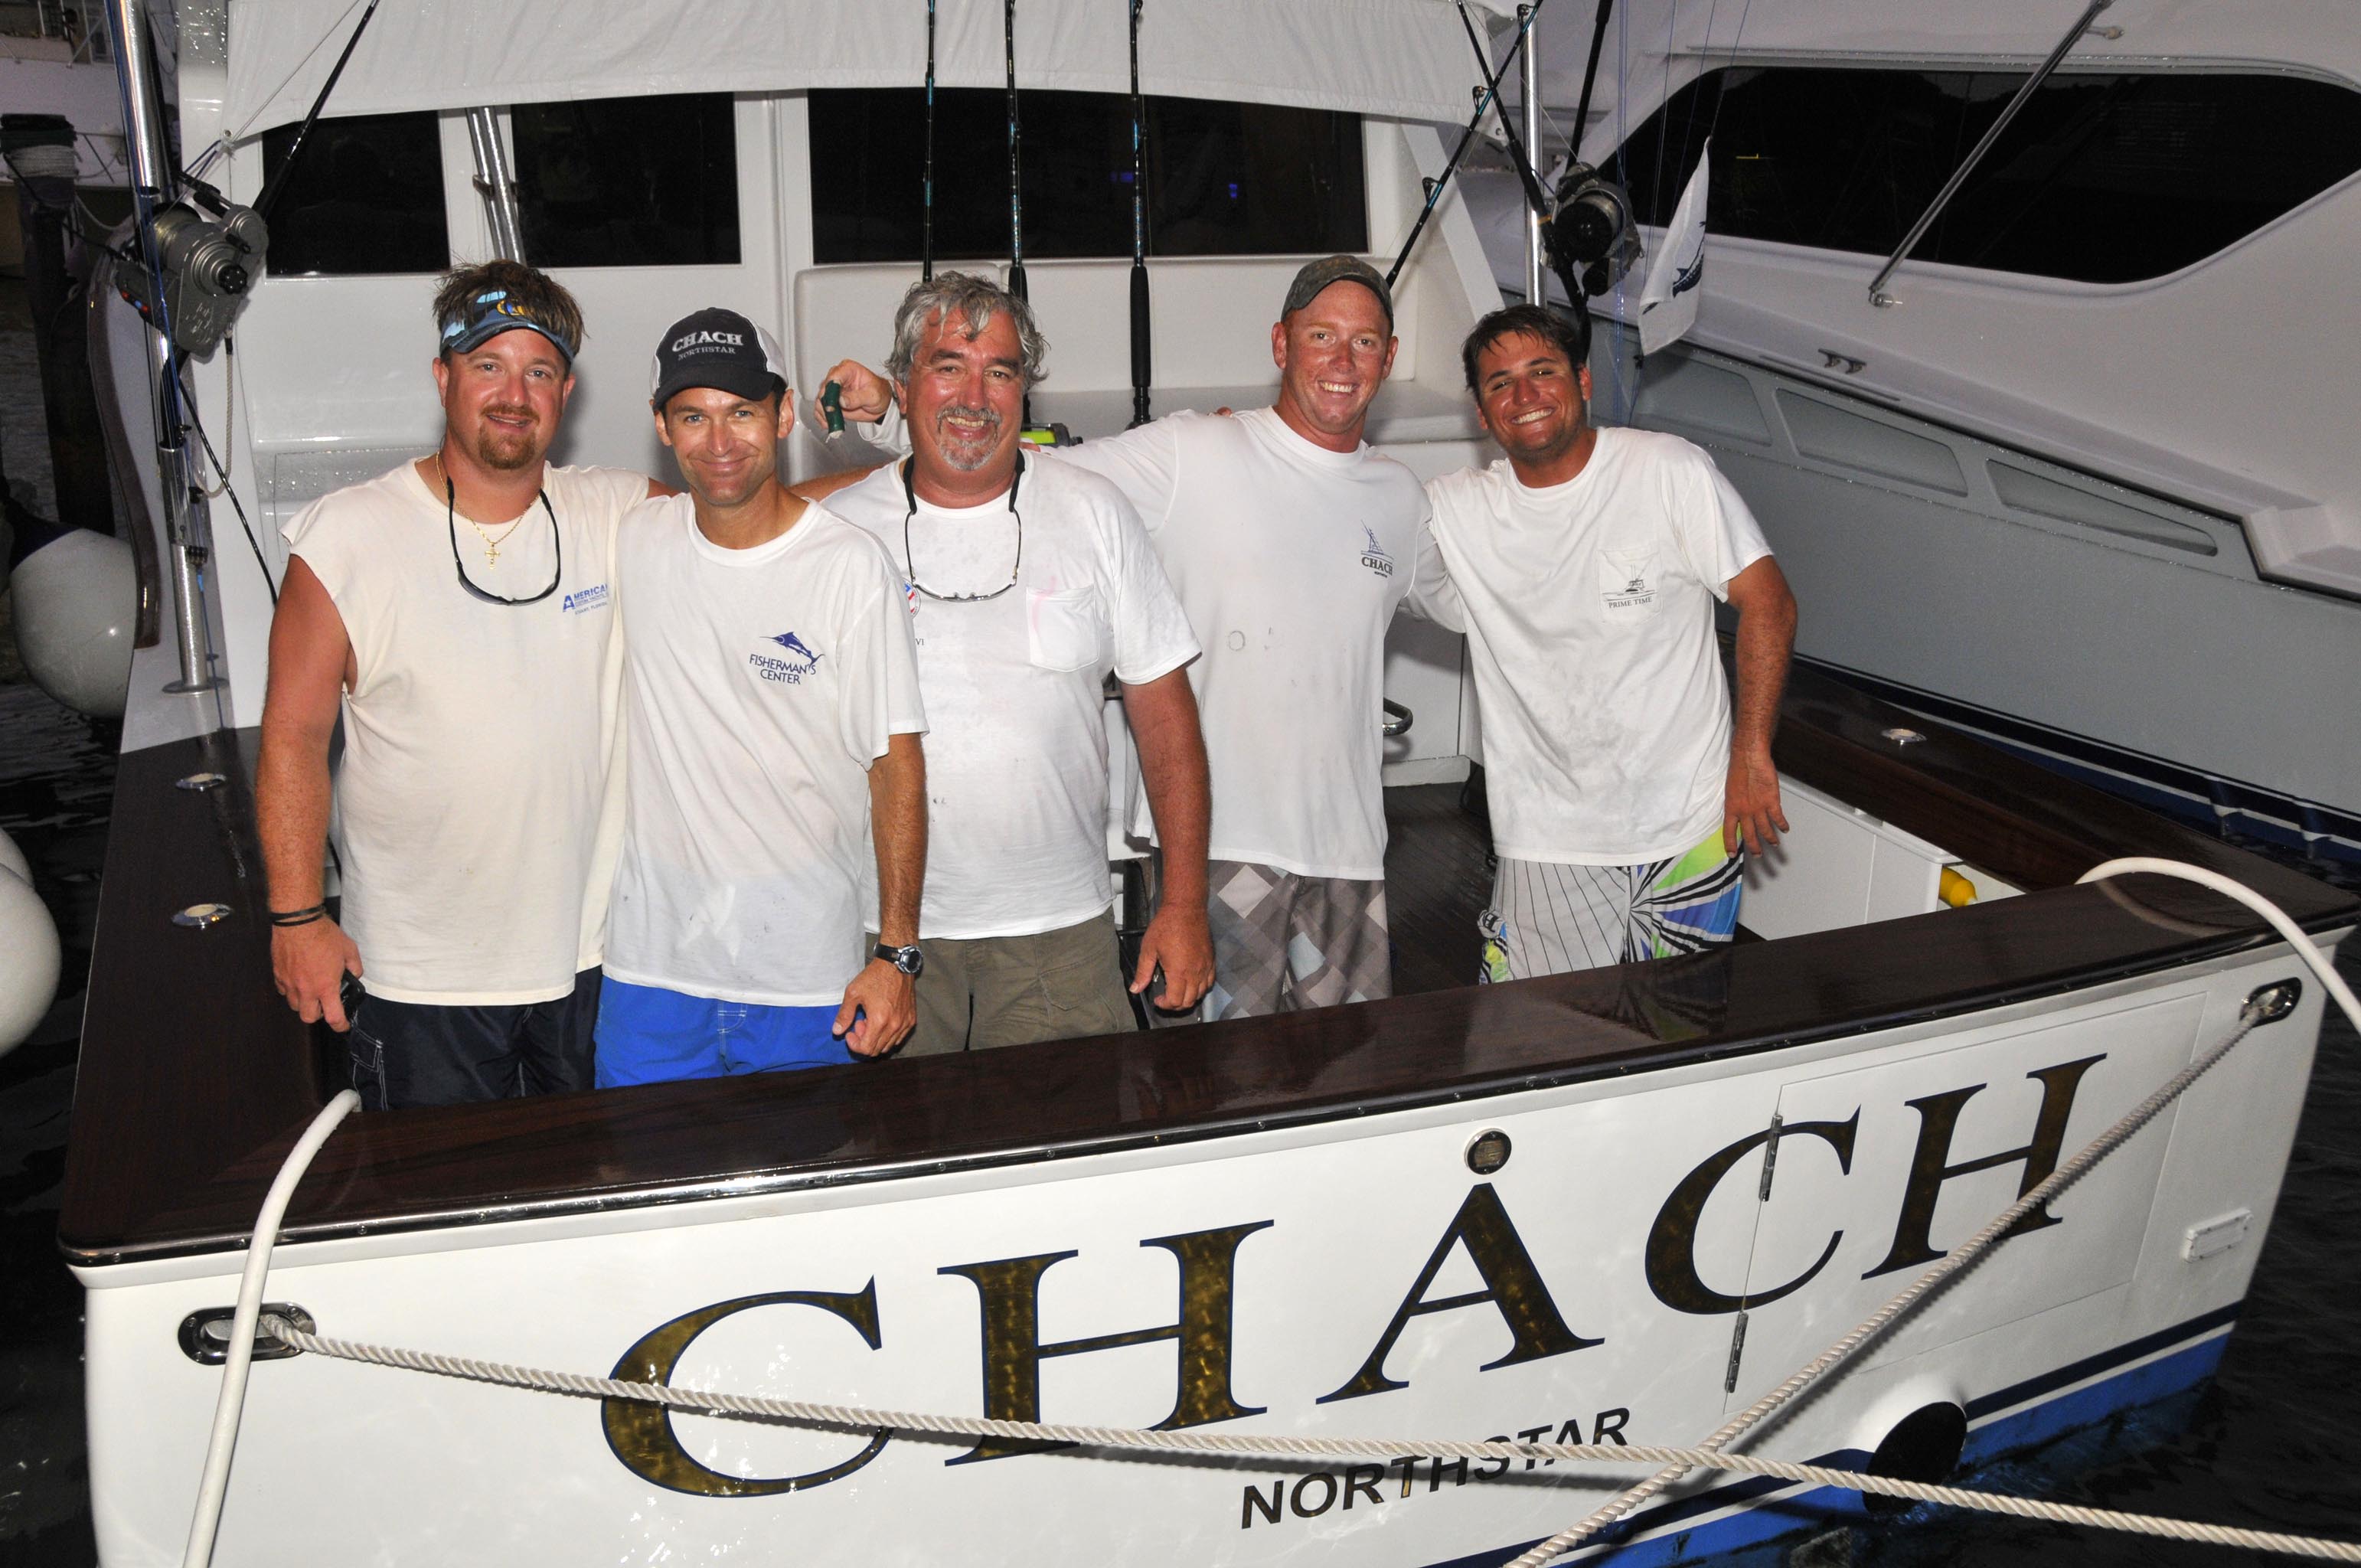 The team aboard Chach, a Monterey 58 out of Louisiana, is top boat after the first day of fishing. L to R: Chad Guileau (mate), Damon Chouest (angler), Dominick LaCombe (angler), Matt Coppoletta (mate) and Capt. Dave Dalfo. Credit: Dean Barnes